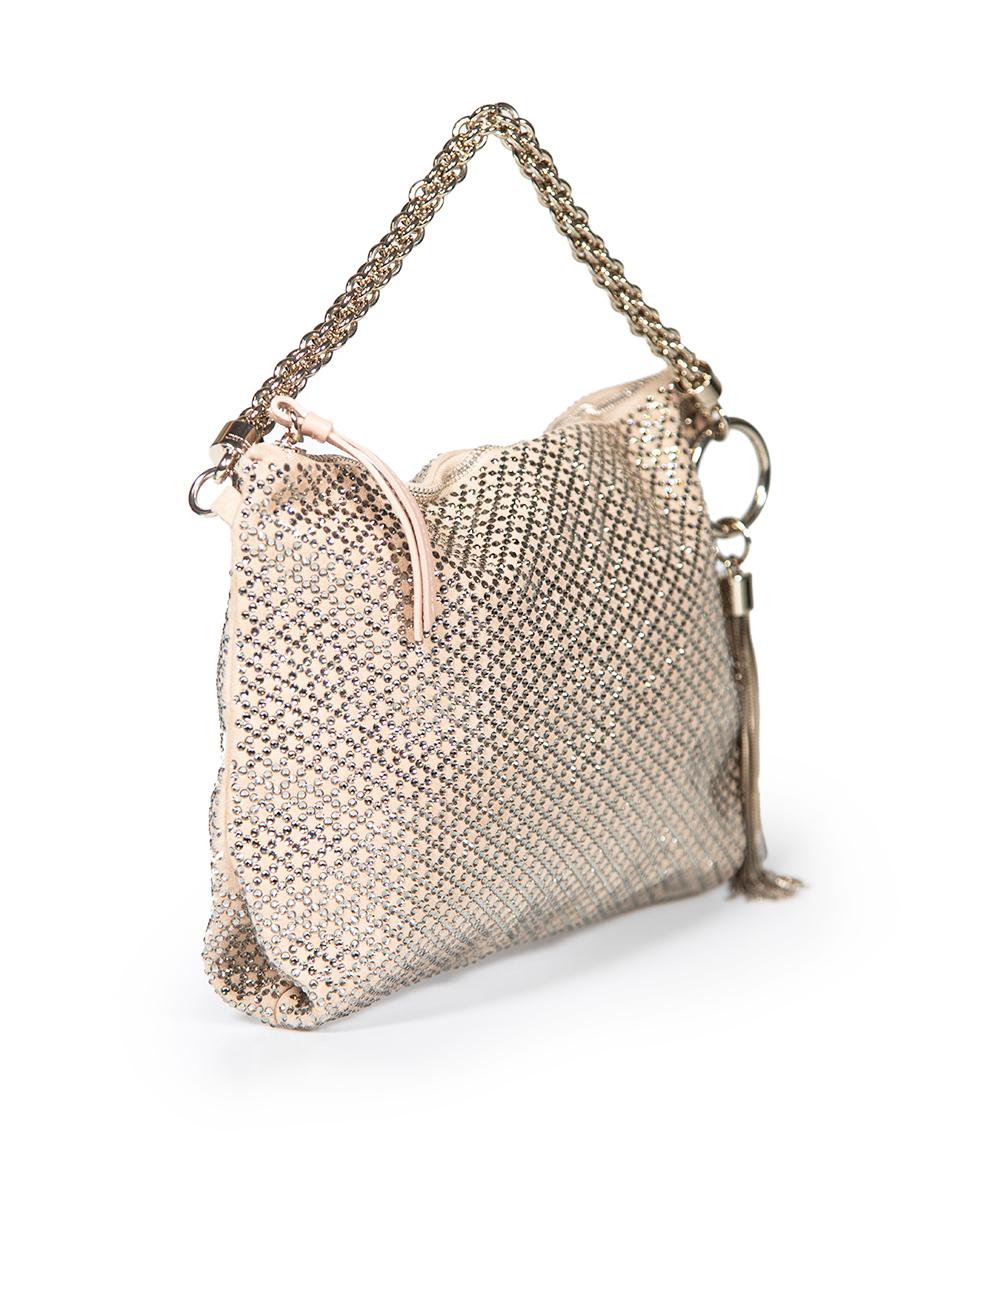 CONDITION is Never worn. No visible wear to bag is evident on this new Jimmy Choo designer resale item. This item comes with original dust bag.
 
 
 
 Details
 
 
 Callie
 
 Beige
 
 Suede
 
 Clutch bag
 
 Crystal embellished
 
 Silver tone